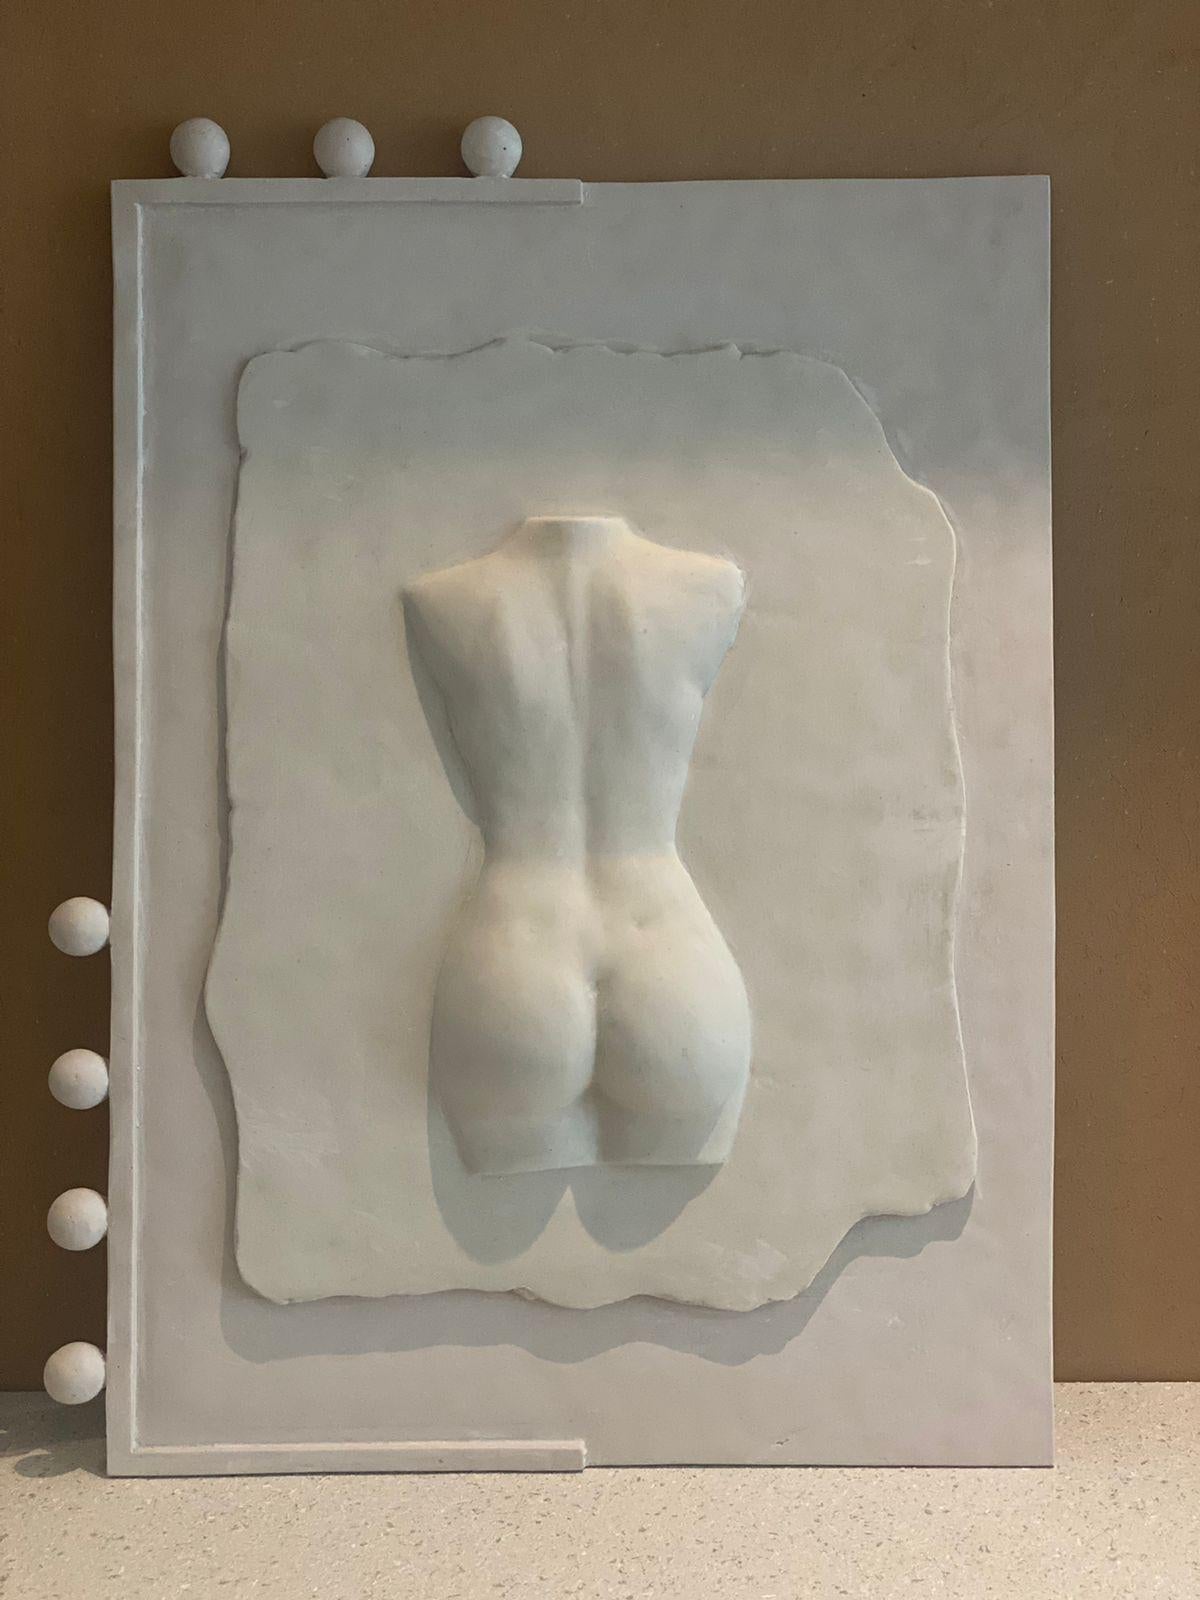 A  female torso sculpture wall art piece that calls on references of Renaissance paintings and academic ceramic sculptures. This female body piece explores historic interpretations of the female body within a contemporary context, resulting in a